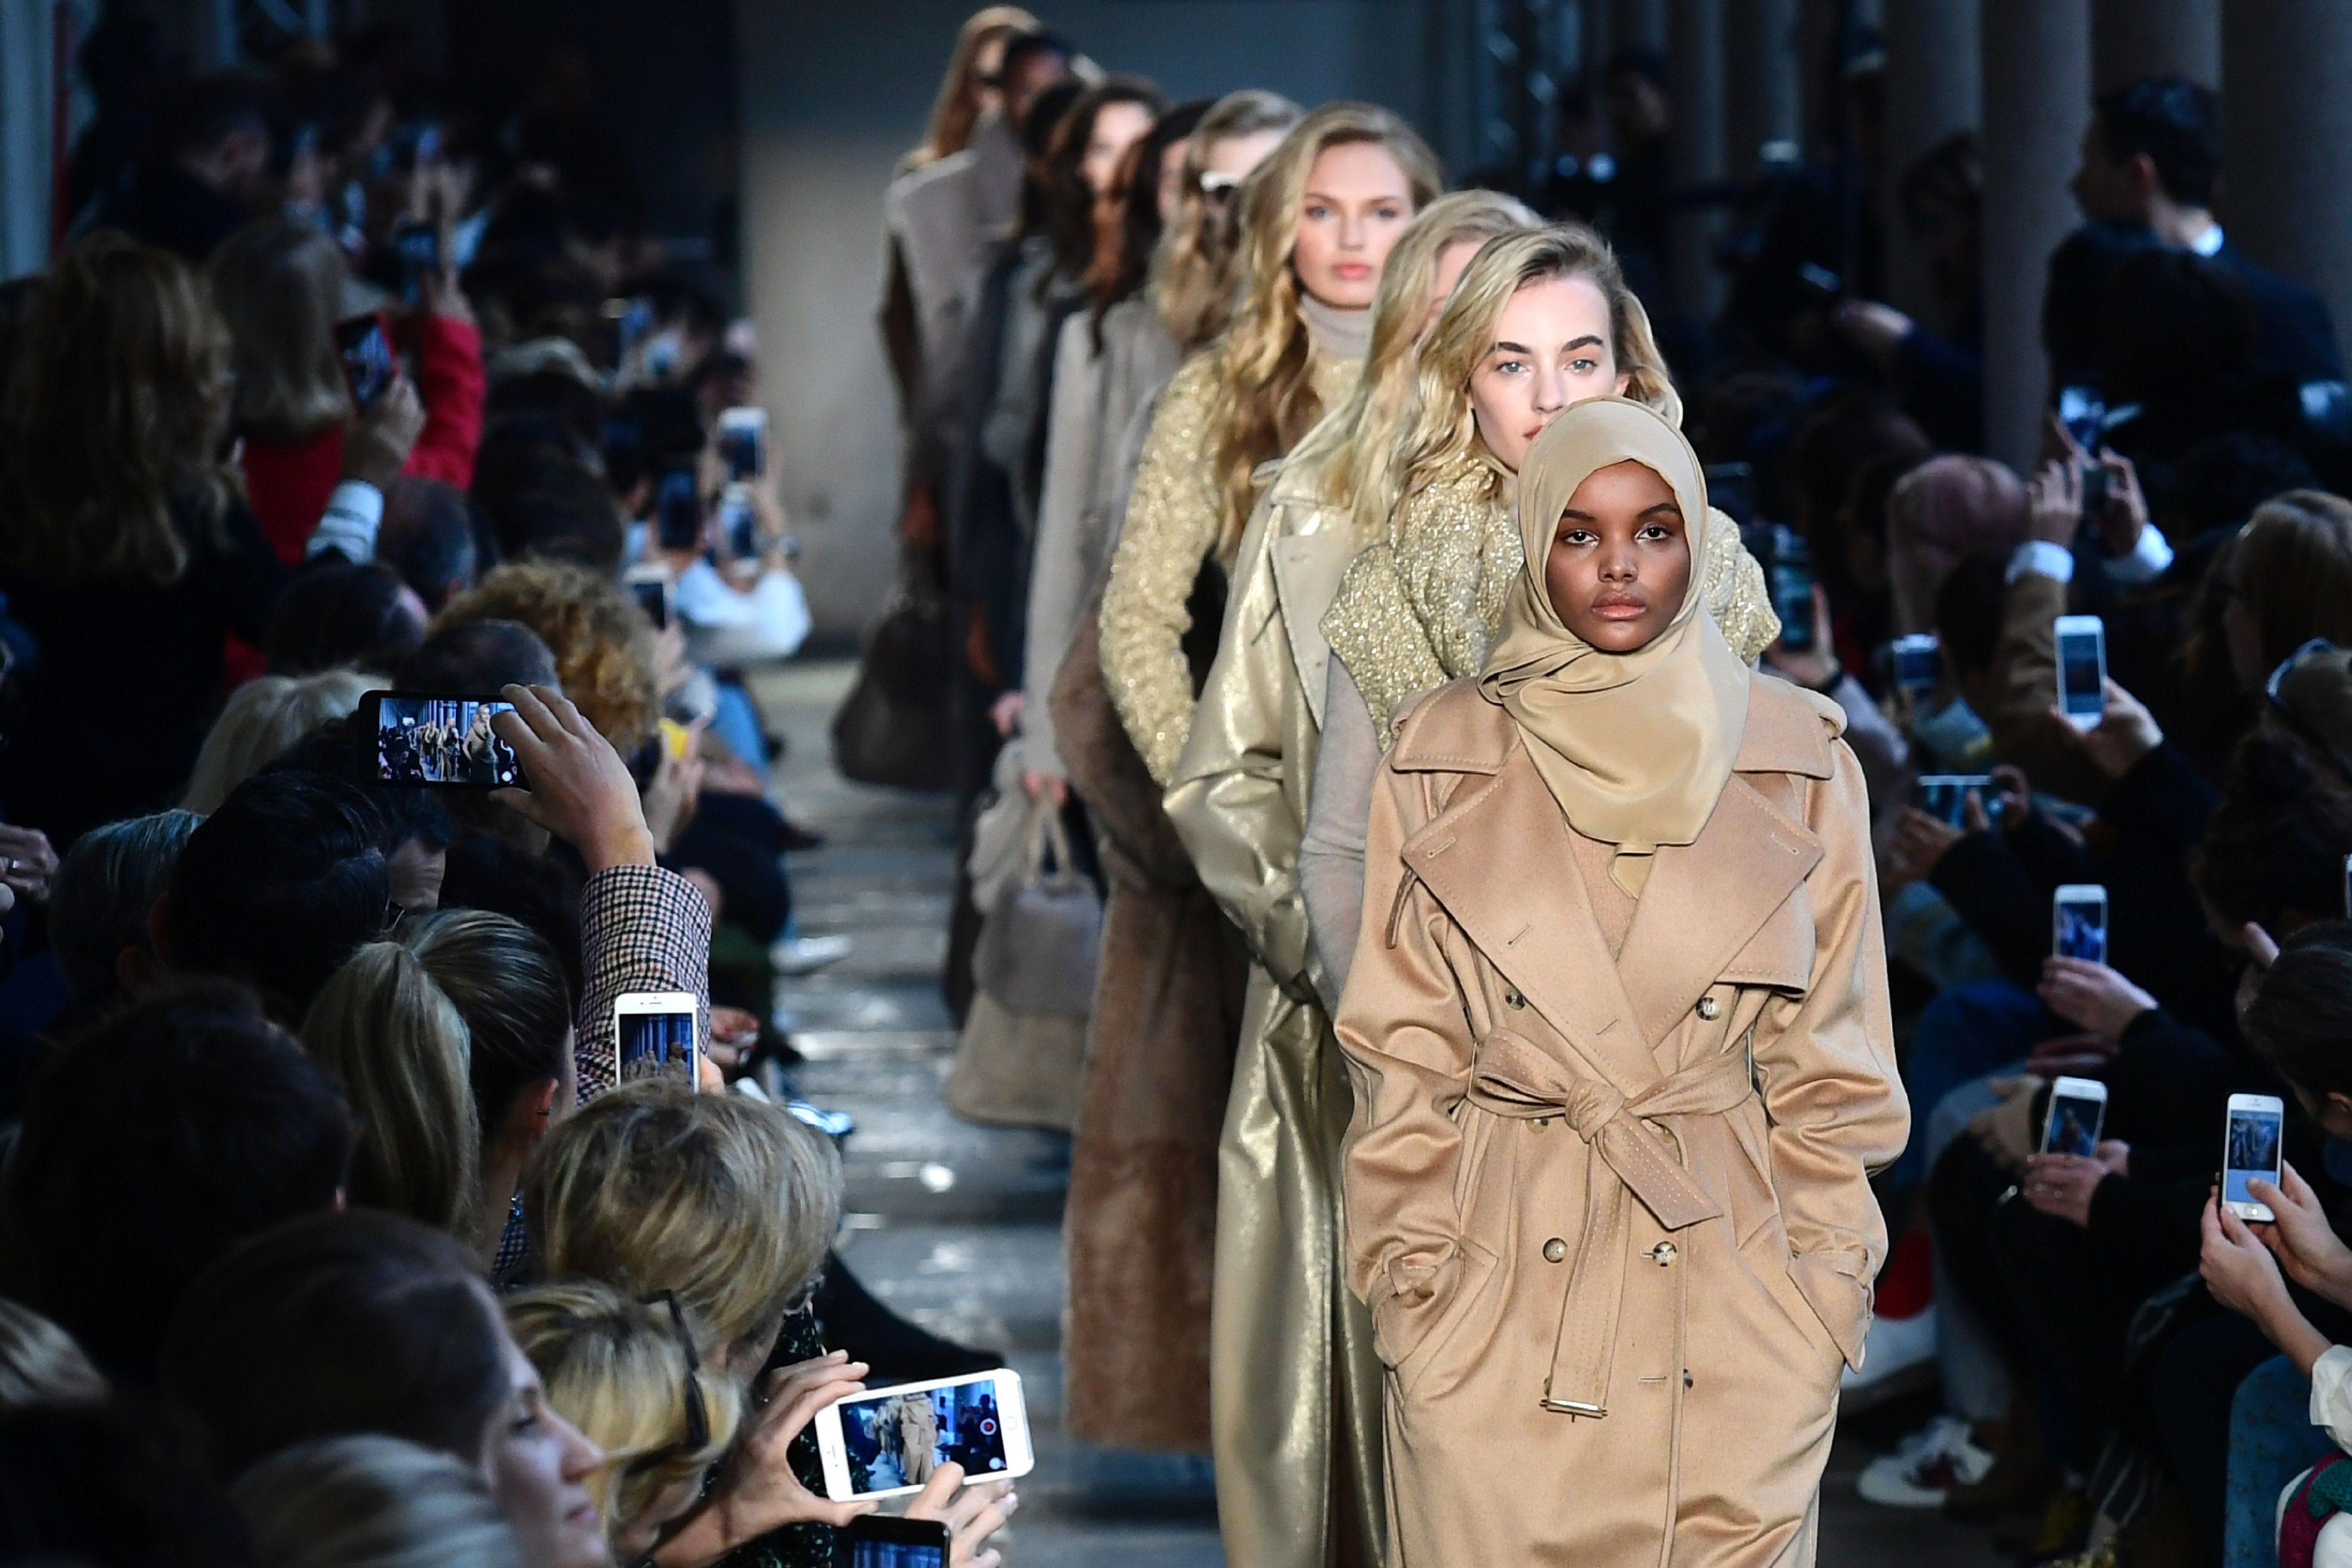 US-Somalia model Halima Aden presents a creation for fashion house Max Mara during the Women's Fall/Winter 2017/2018 fashion week in Milan, on February 23, 2017.  / AFP / Miguel MEDINA        (Photo credit should read MIGUEL MEDINA/AFP/Getty Images) (MIGUEL MEDINA—AFP/Getty Images)